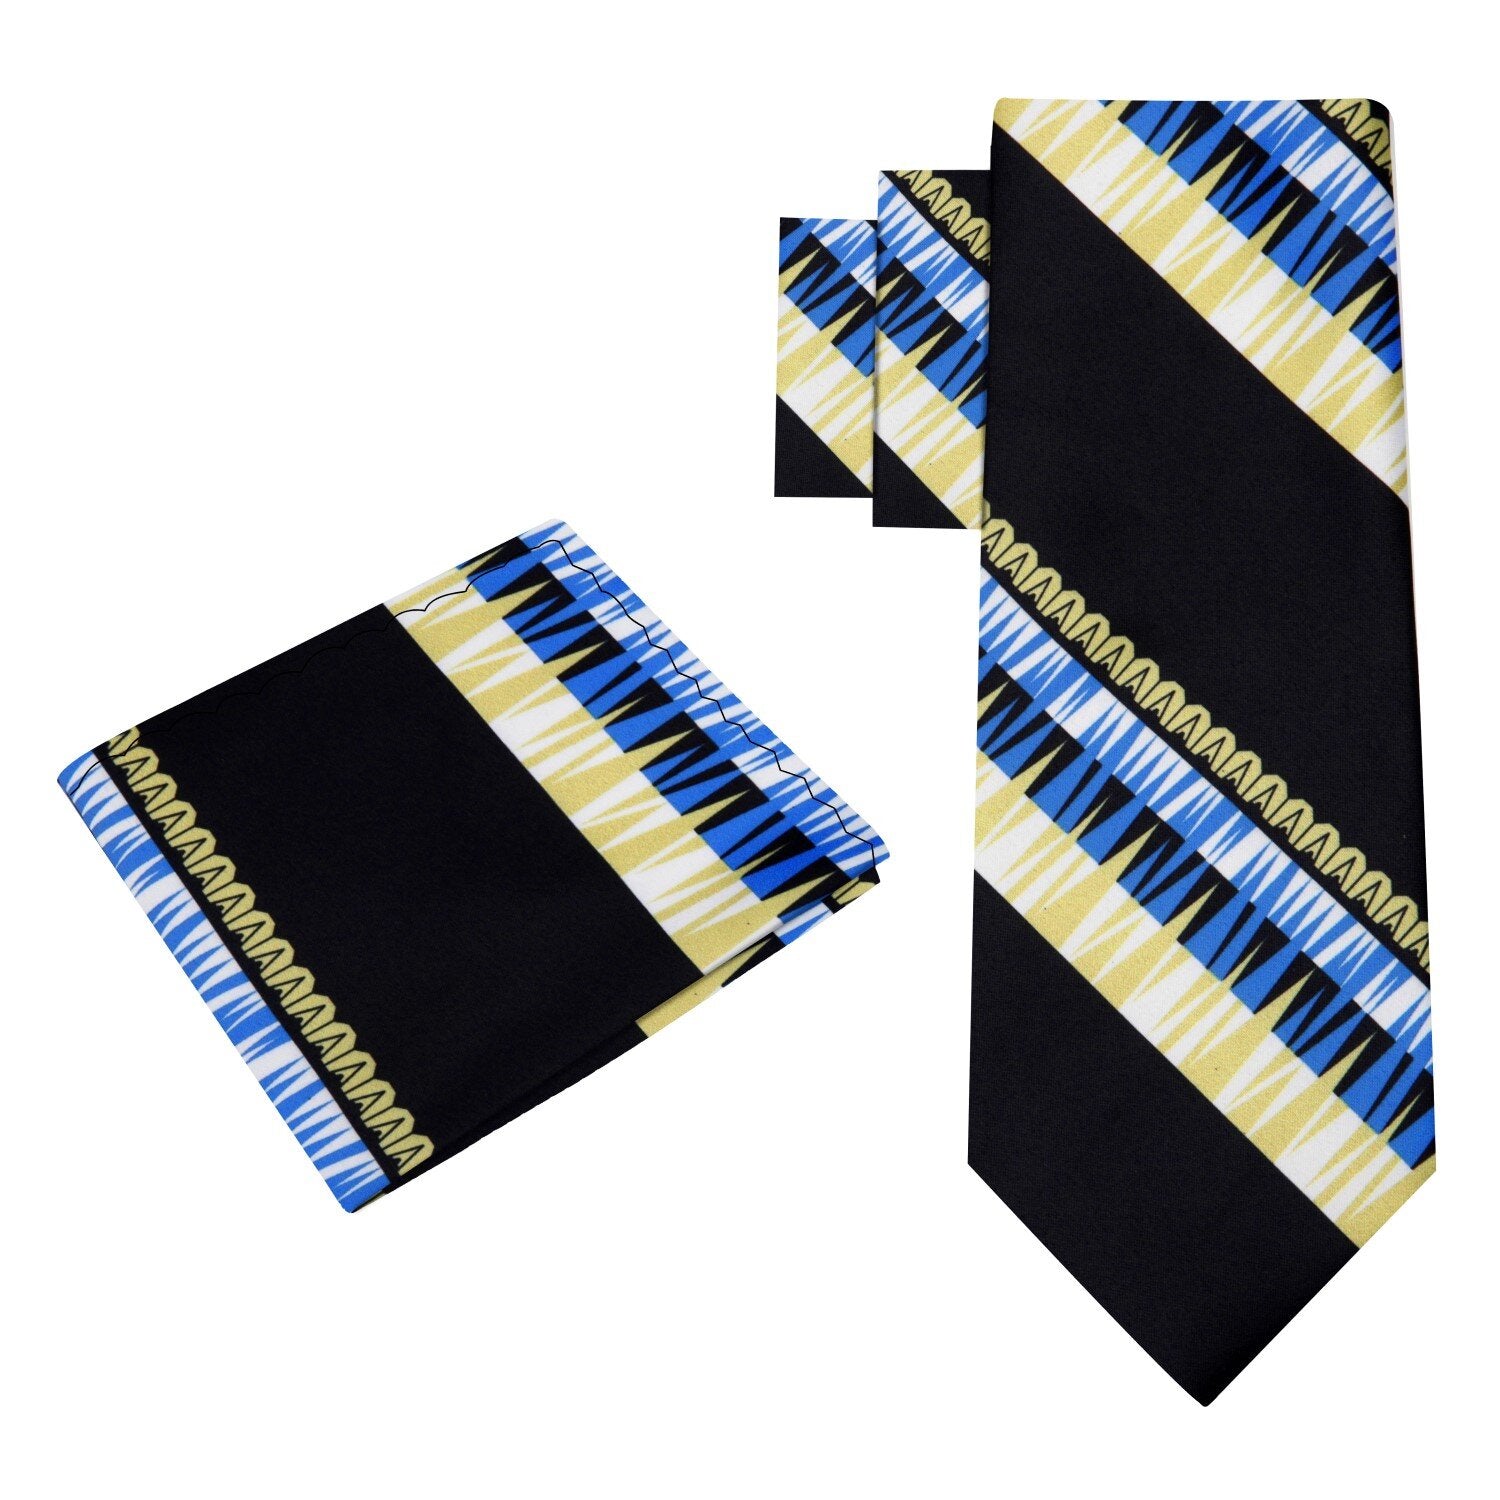 Alt View; black, blue, yellow abstract tie and square